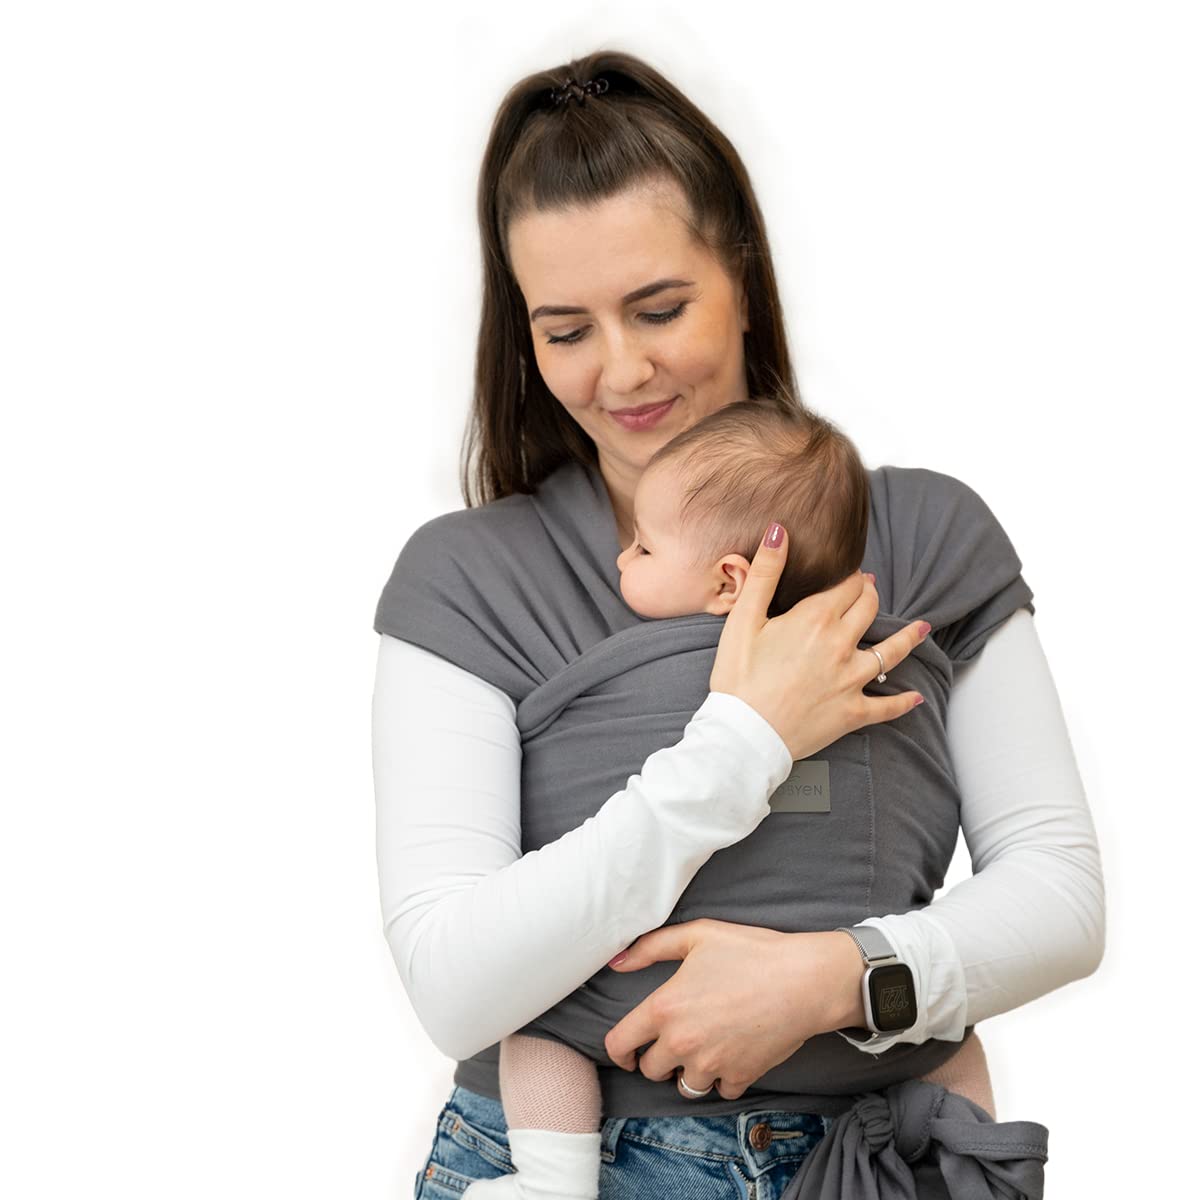 MABYEN Newborn Baby Carrier - Baby Carrier for Newborns from Birth - Elastic Baby Carrier with Practical Storage Bag - Strengthens the bond between you and your baby